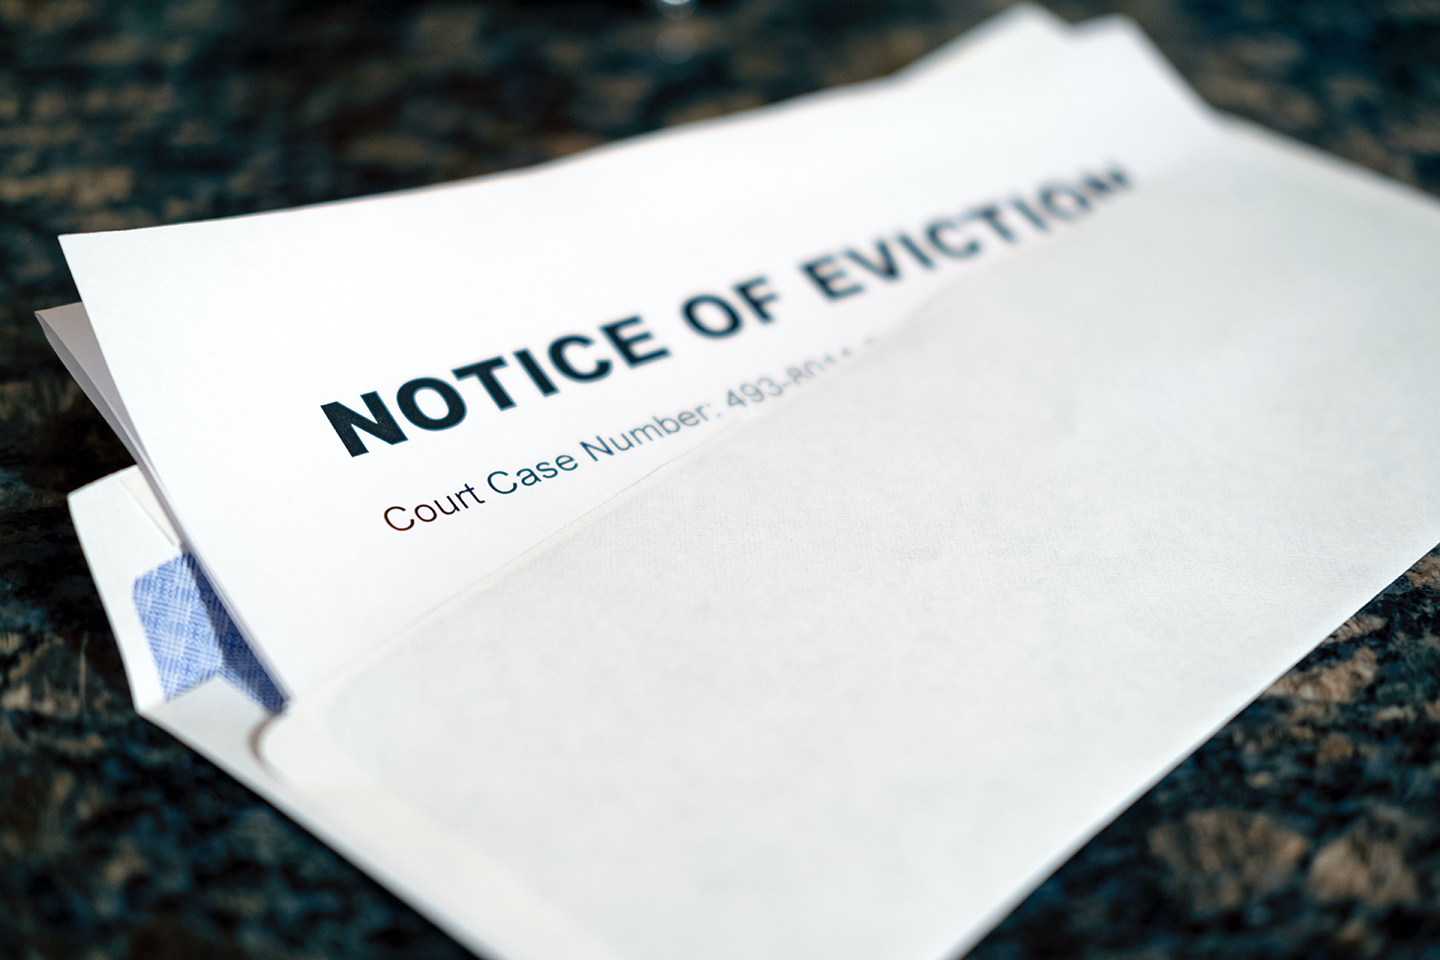 Illegal eviction